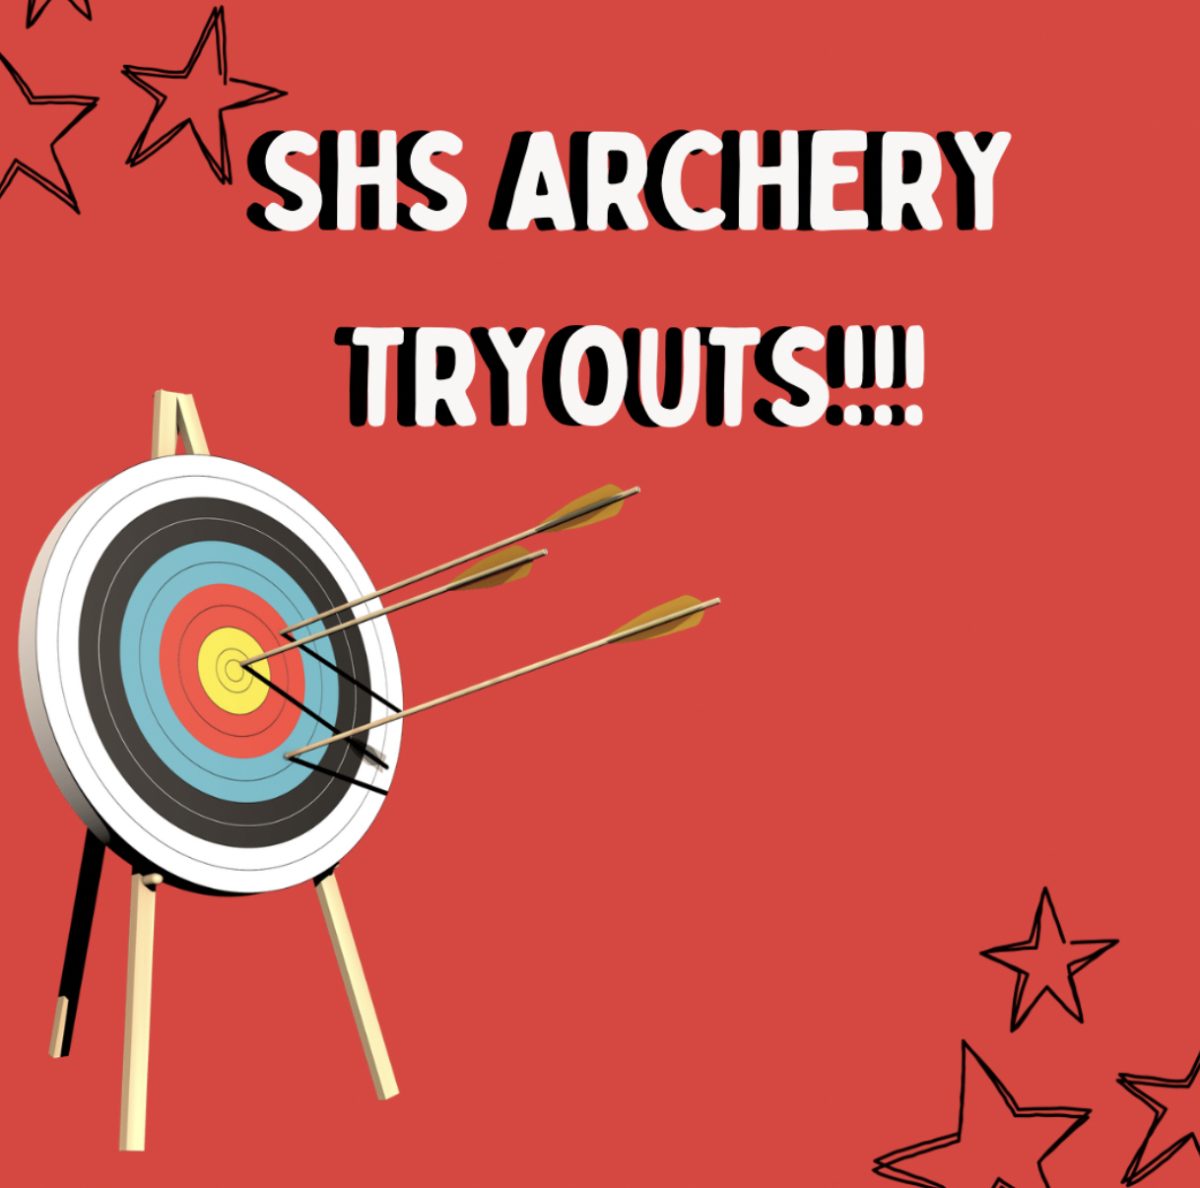 SHS+Archery+Club+is+holding+tryouts+this+year+on+October+19th+and+23rd